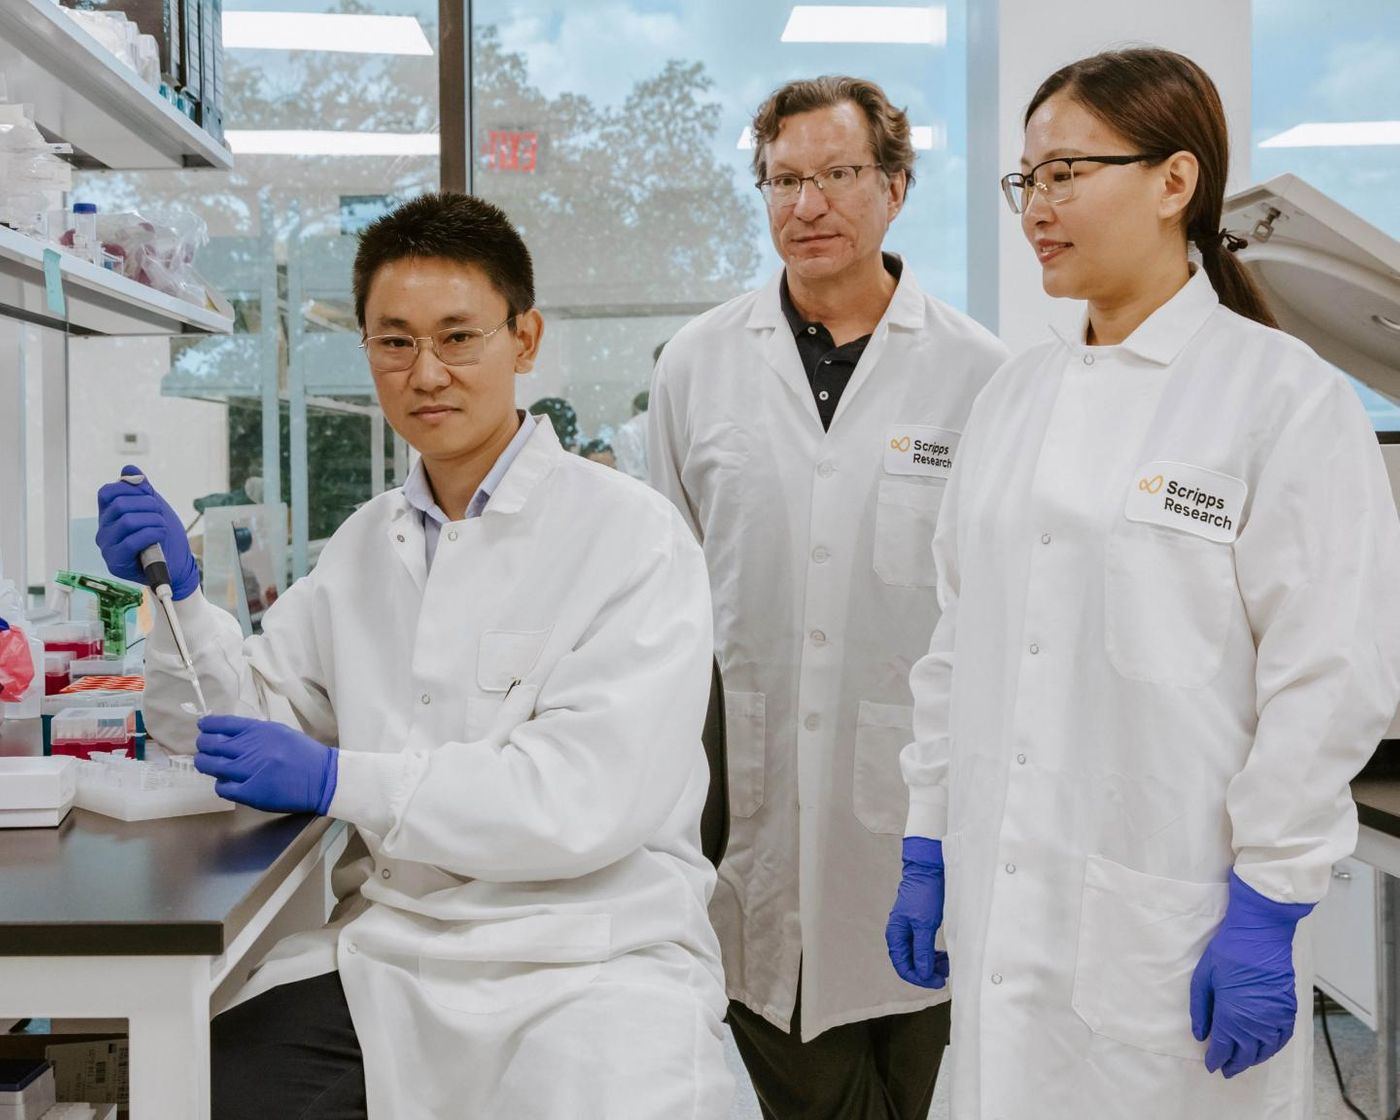 Scripps Research Immunology Professor Michael Farzan, PhD, developed a gene therapy switch with postdoctoral researcher Guocai Zhong, PhD and research assistant Haimin Wang. / Credit: Scripps Research